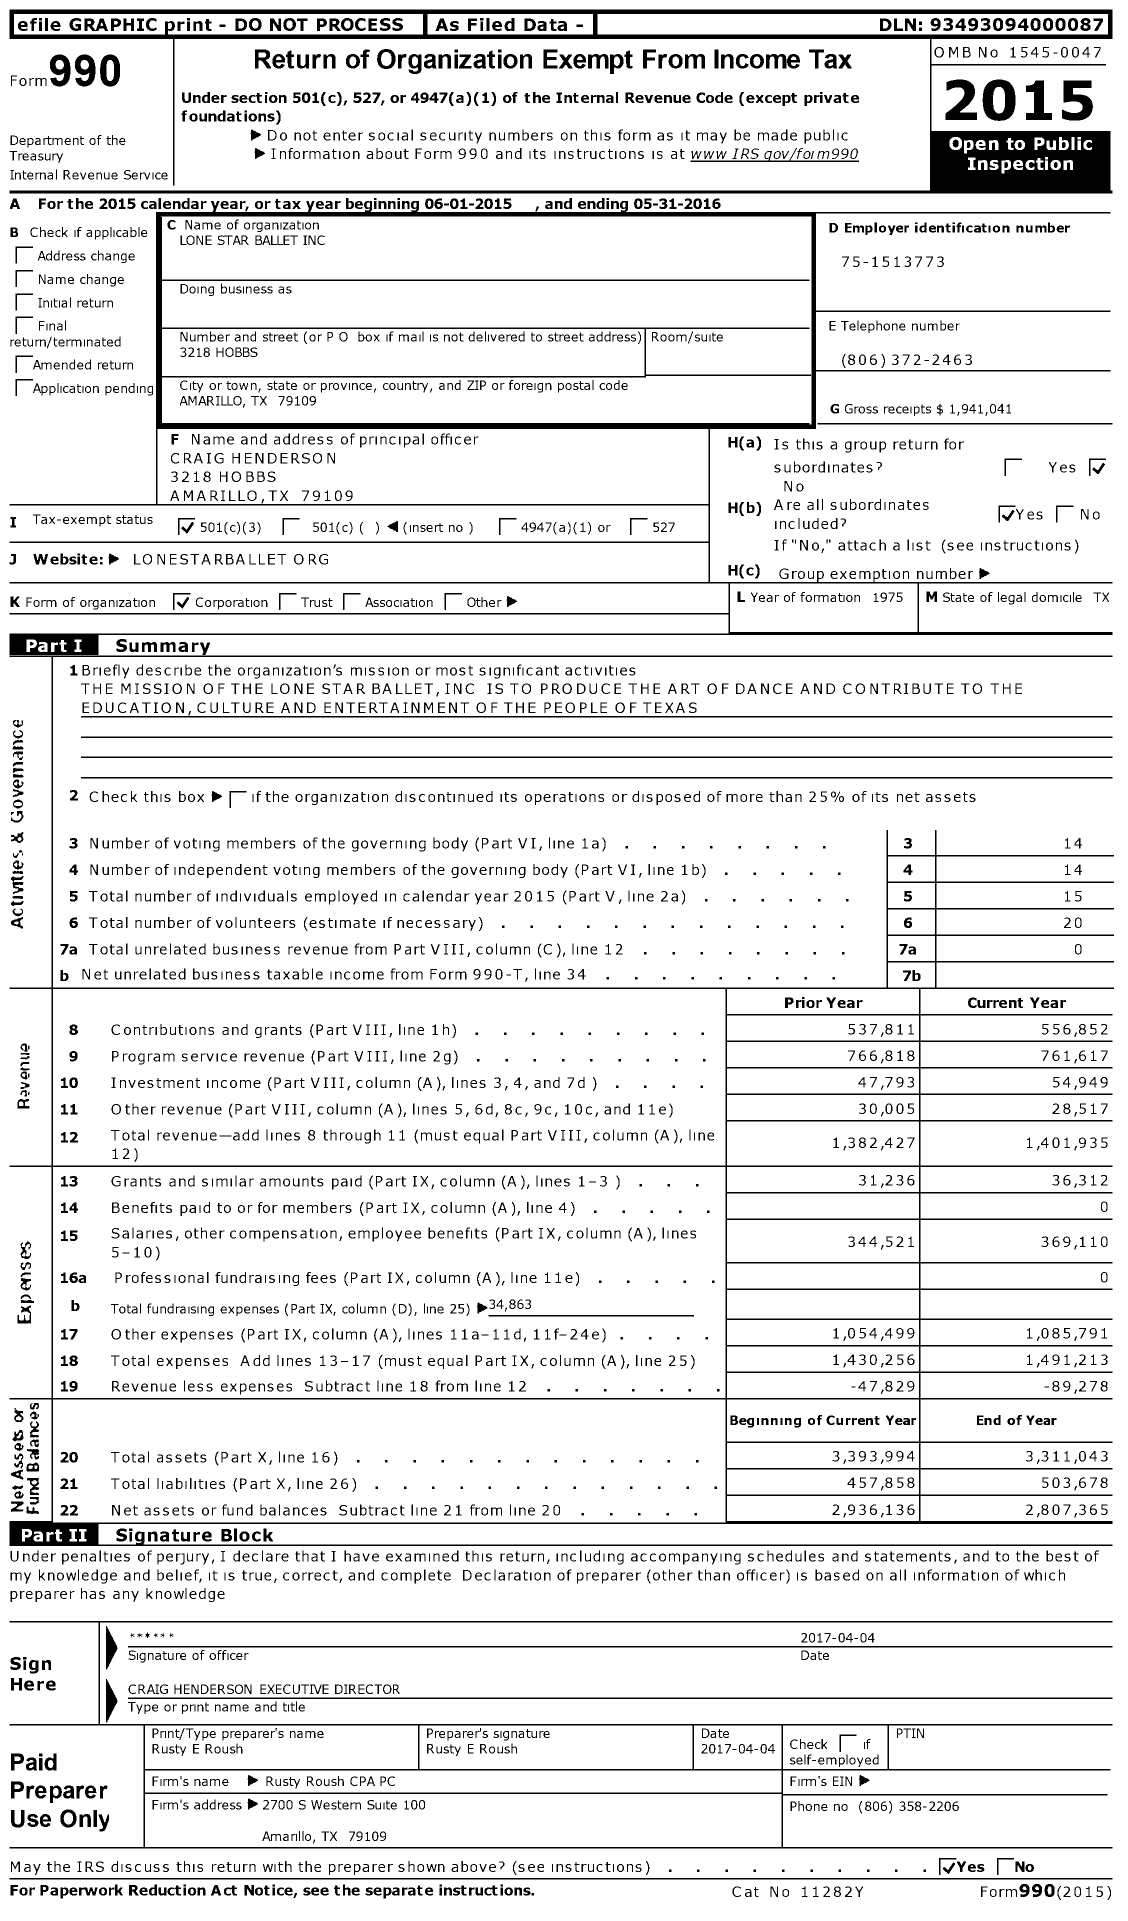 Image of first page of 2015 Form 990 for Lone Star Ballet (LSB)